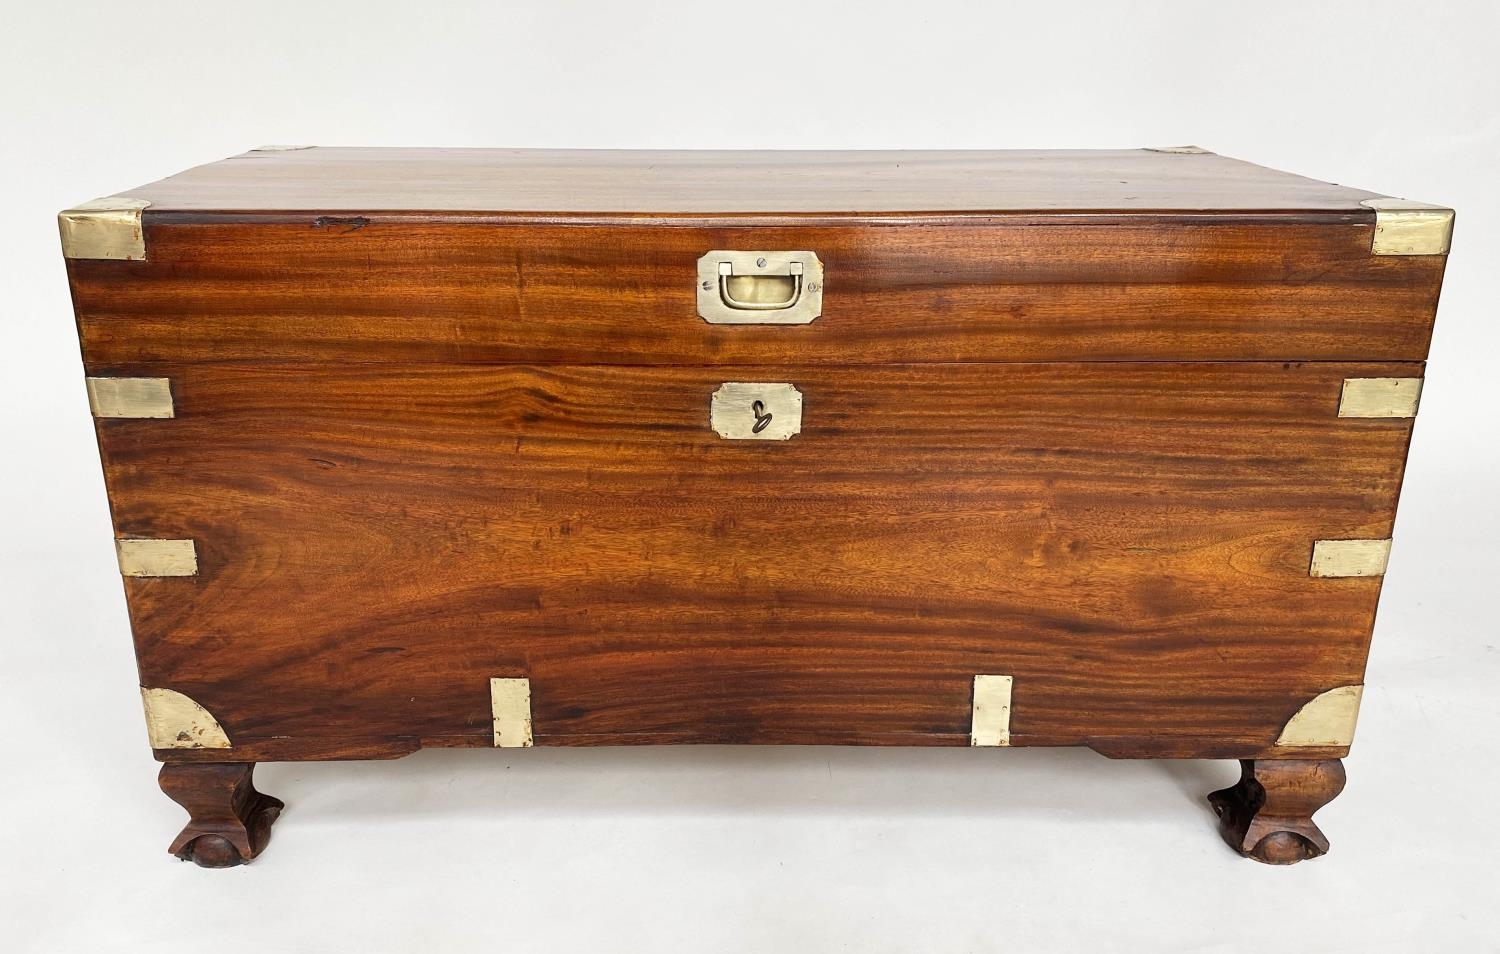 TRUNK, 19th century camphorwood and brass bound with rising lid, carrying handles and short